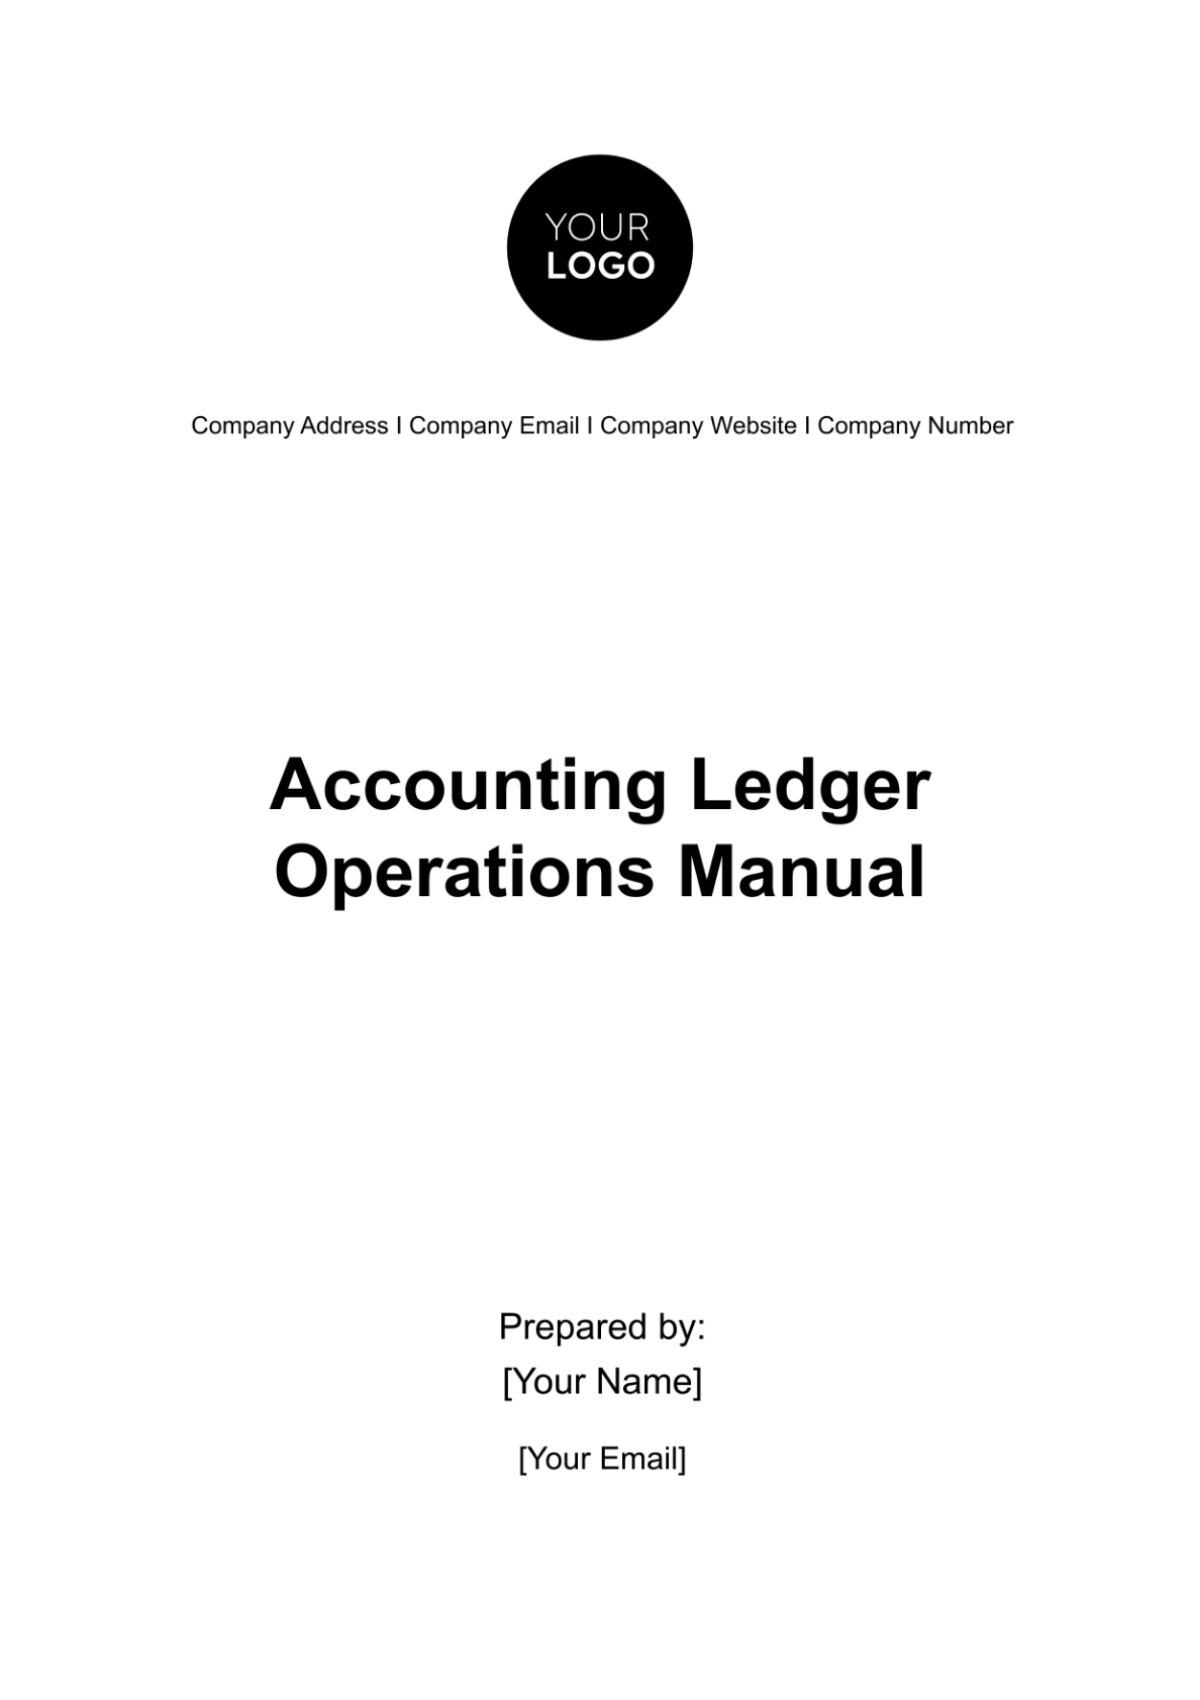 Accounting Ledger Operations Manual Template